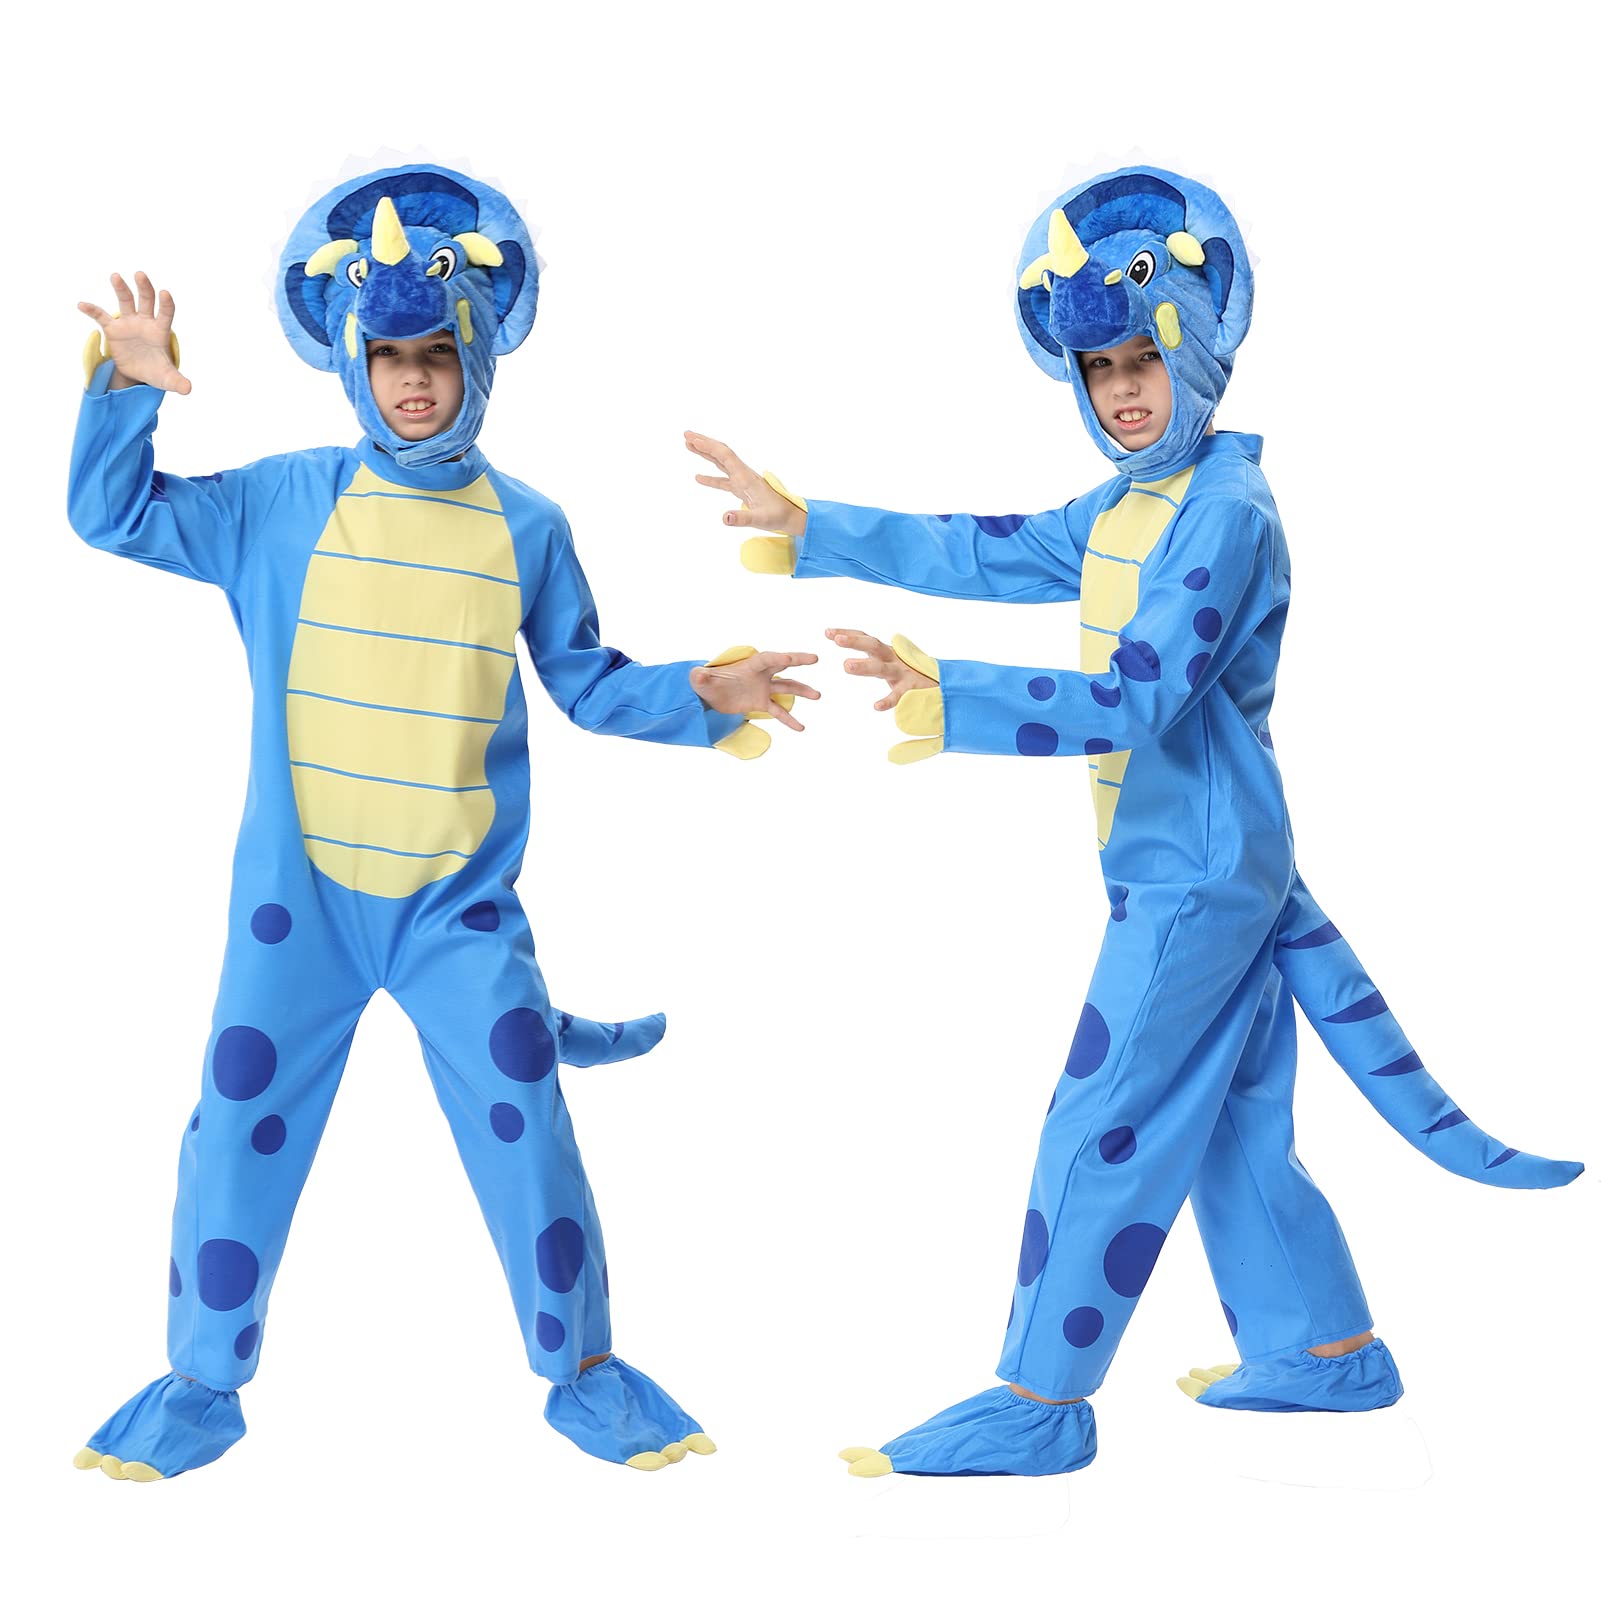 Geefia 1PACK Halloween Triceratops Deluxe Kids Dinosaur Costume for Halloween Dinosaur Dress Up Party(Blue/Yellow,T)